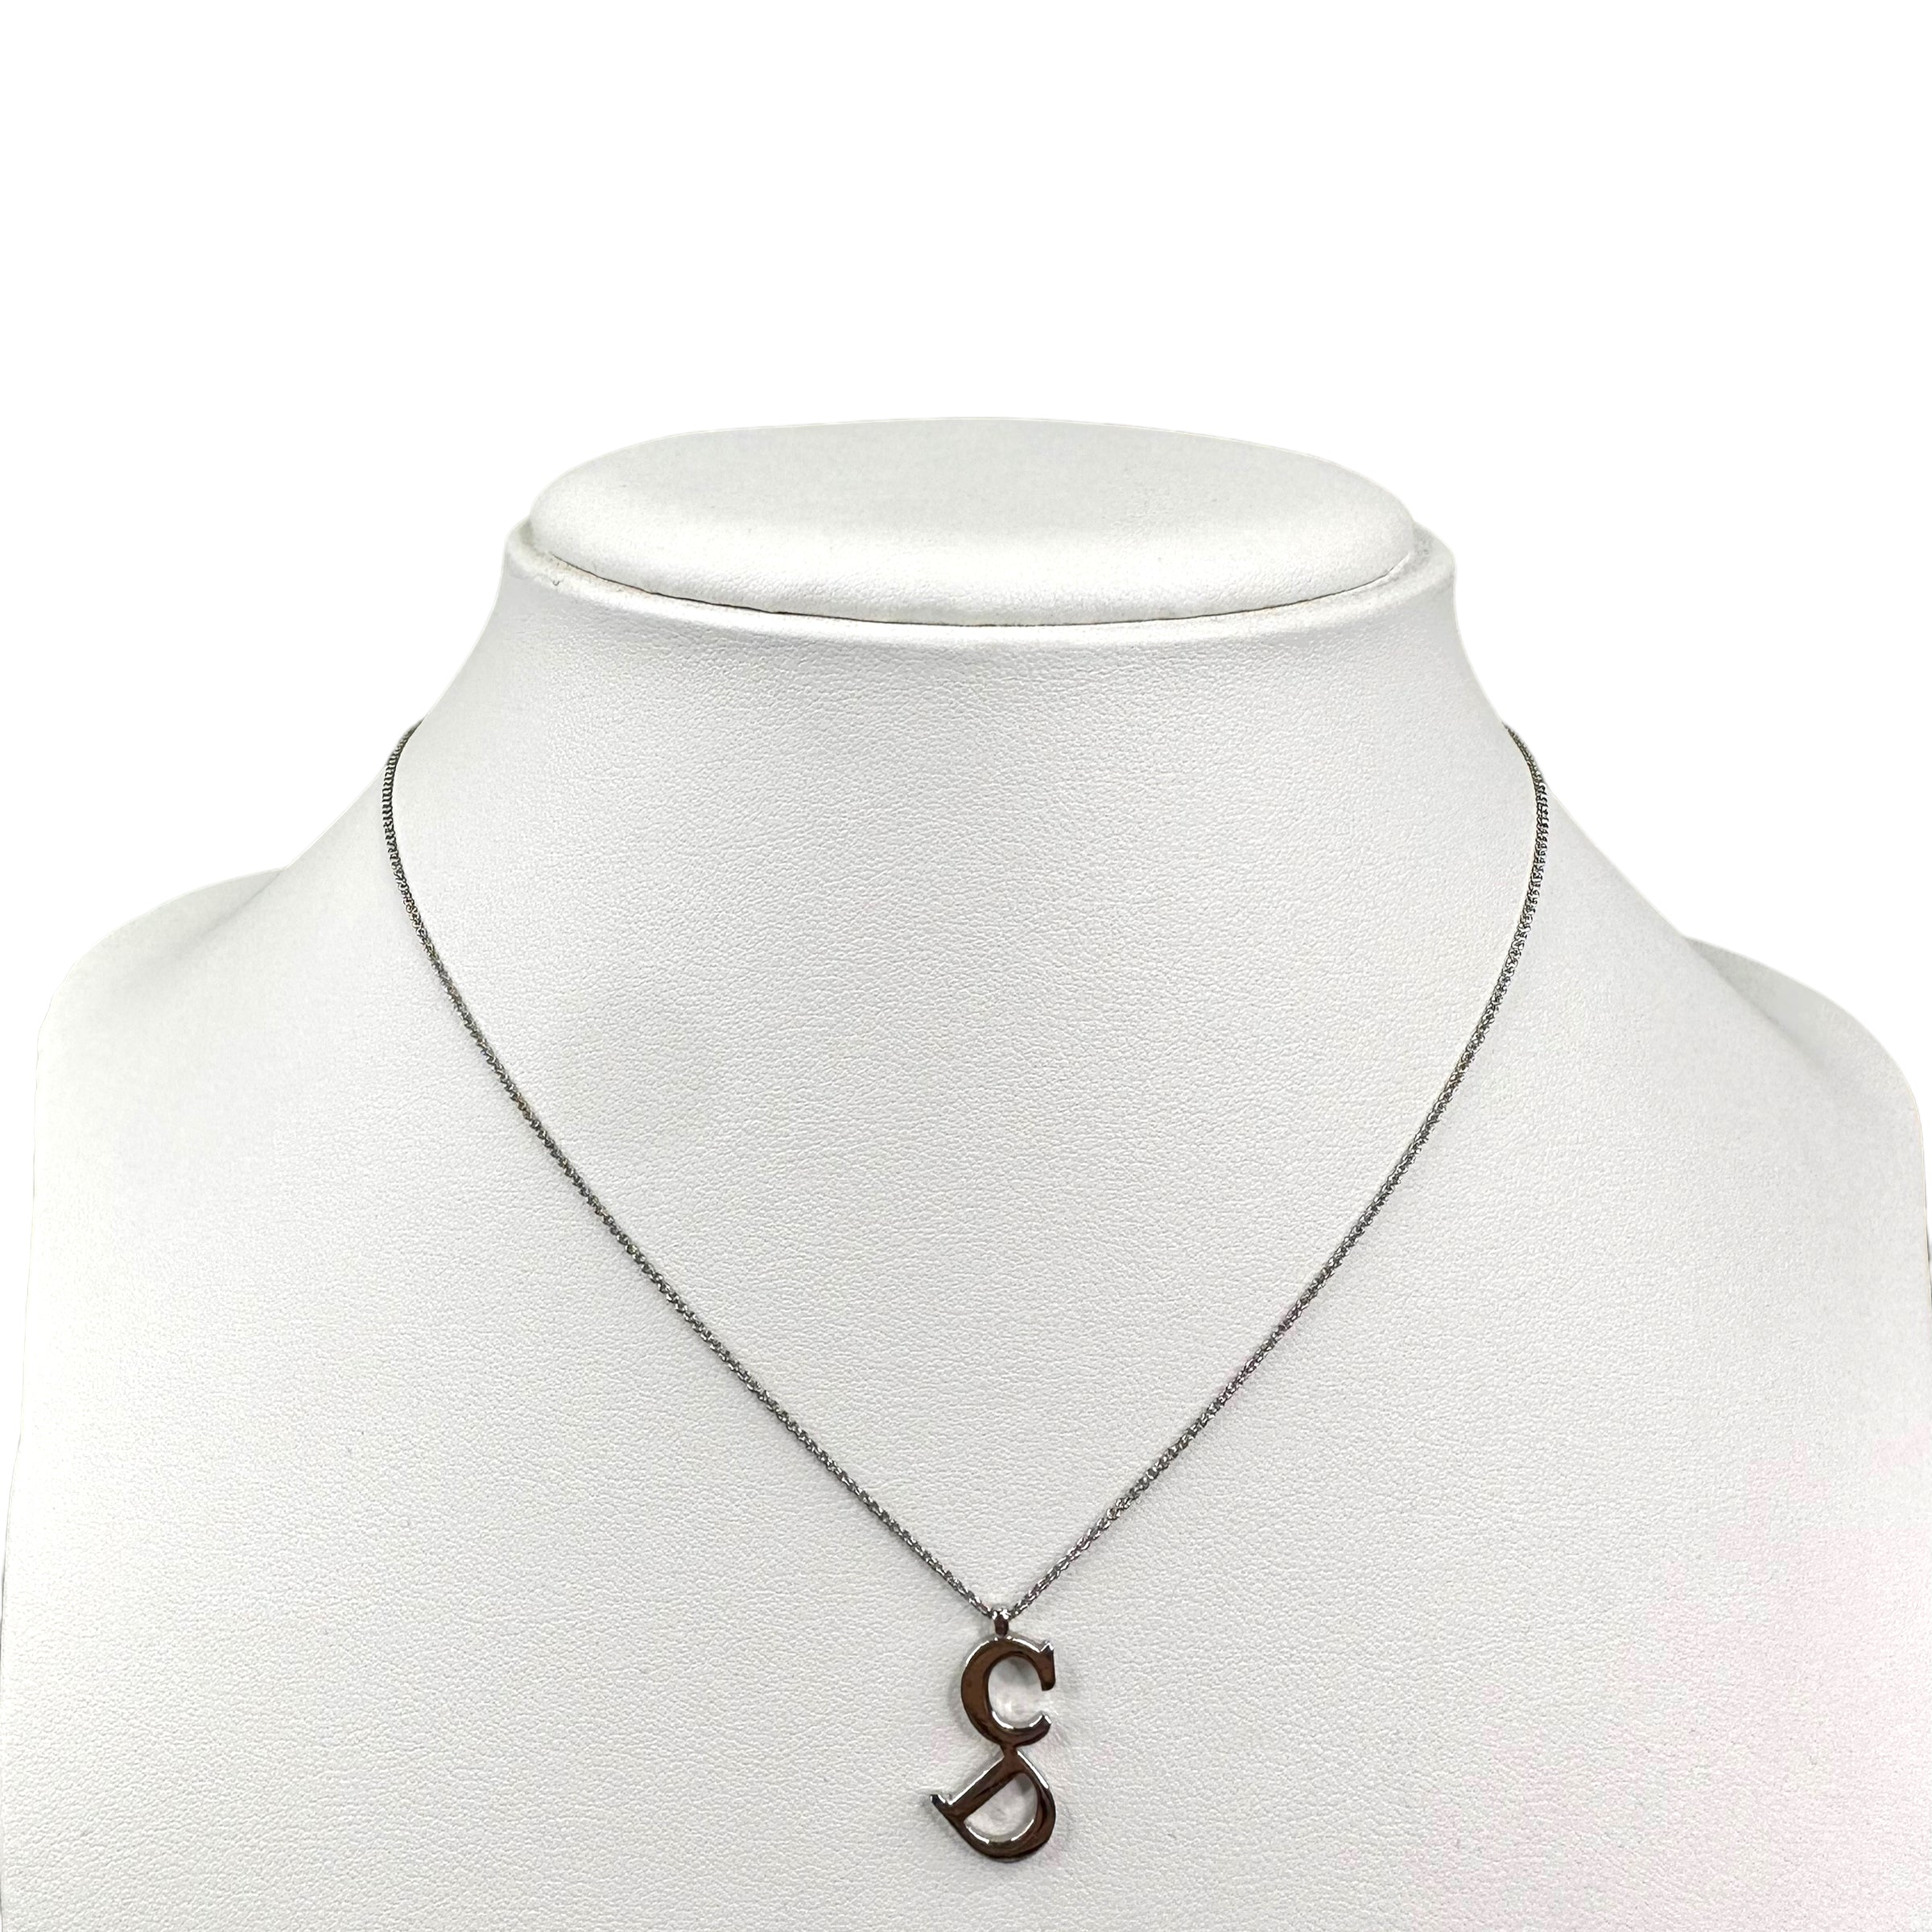 DIOR "CD" PENDANT SILVER-PLATED NECKLACE